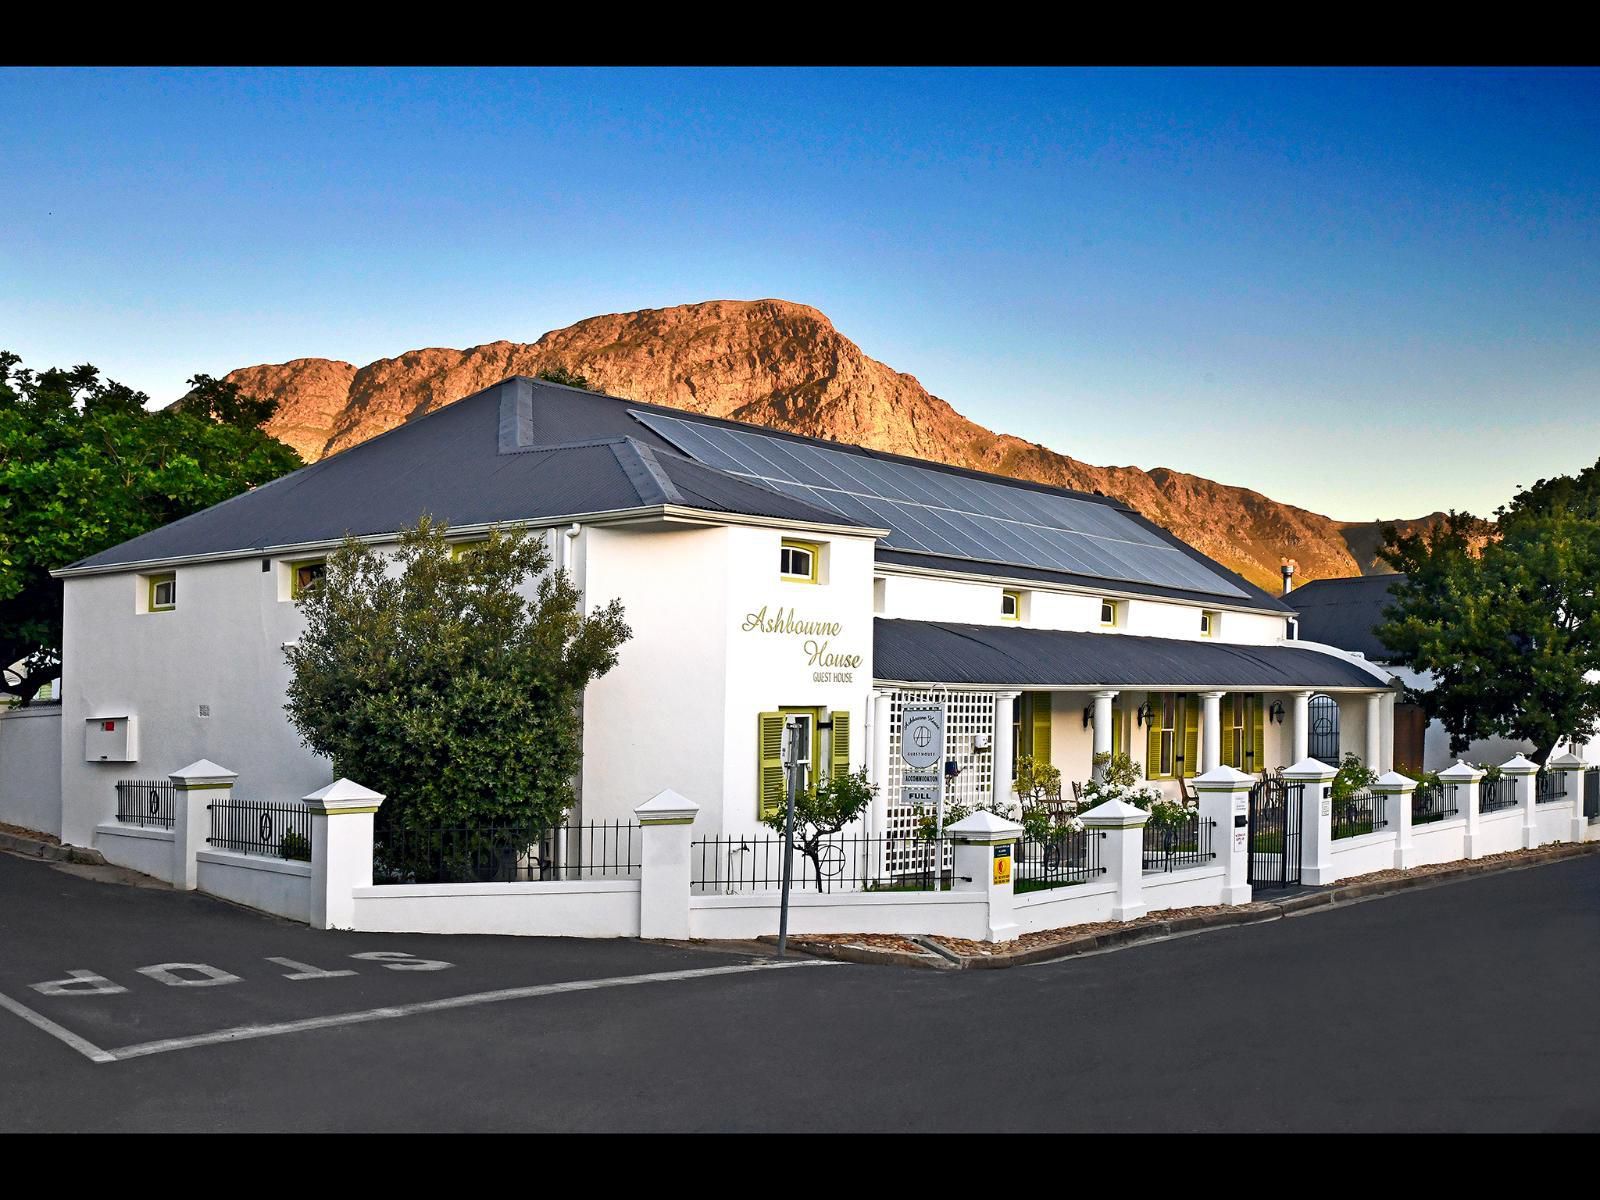 Ashbourne House Franschhoek Western Cape South Africa House, Building, Architecture